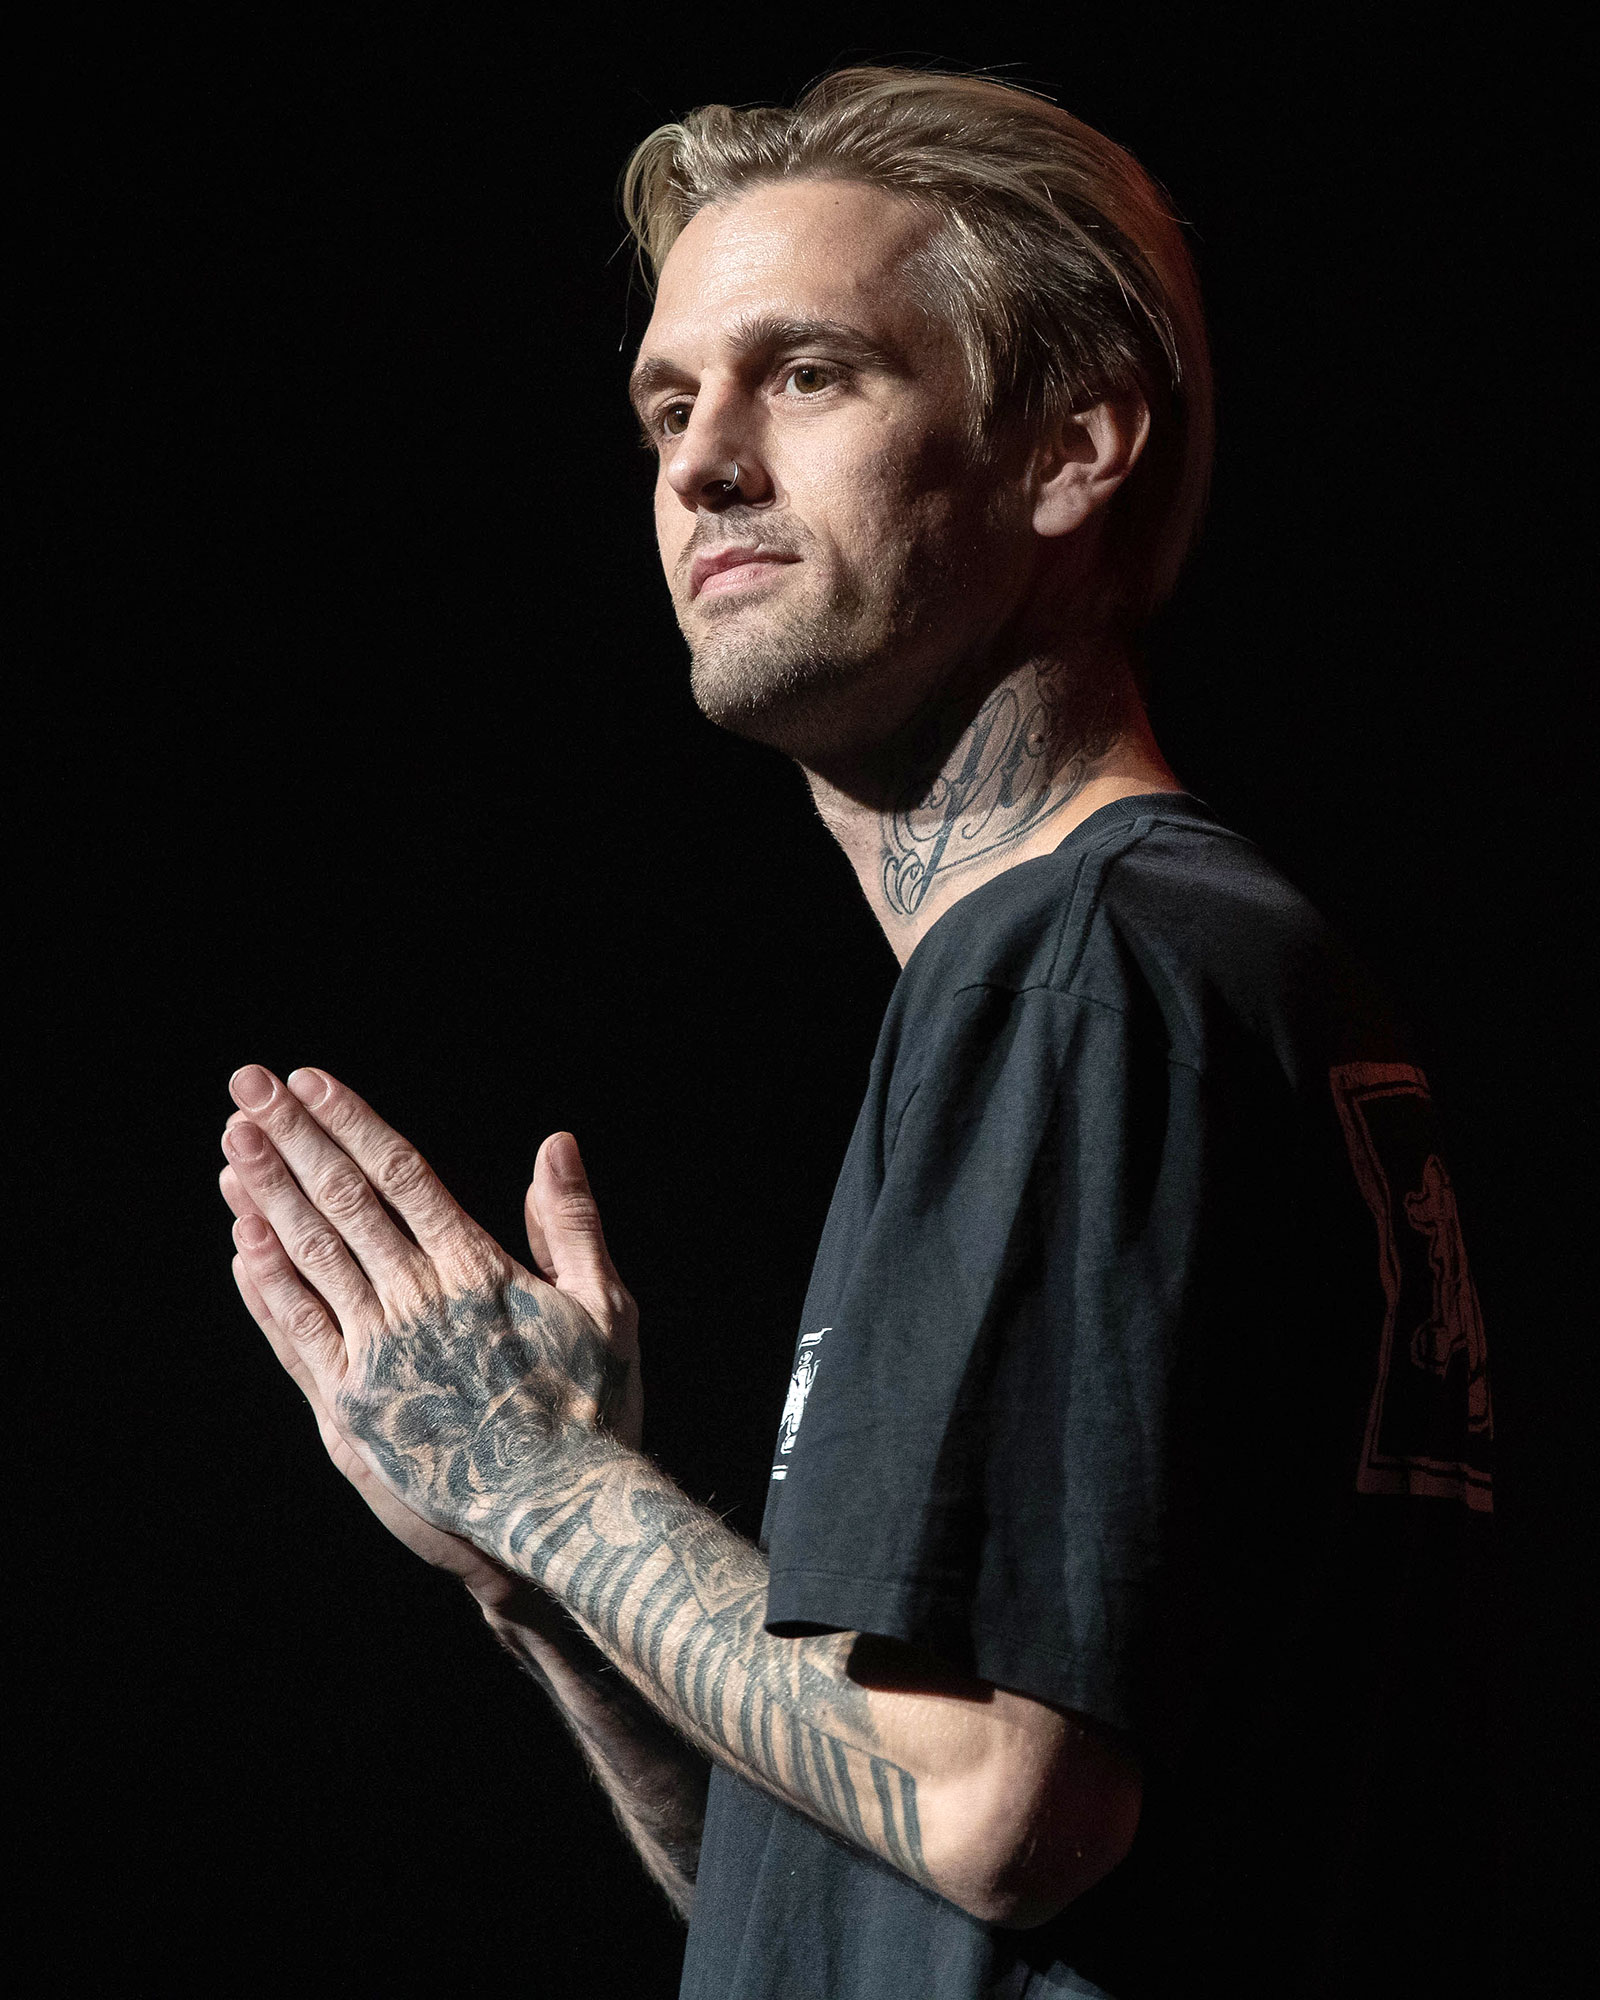 Aaron Carter leaves fans gobsmacked as he reveals giant tattoo of Rihanna  on his face  Heart